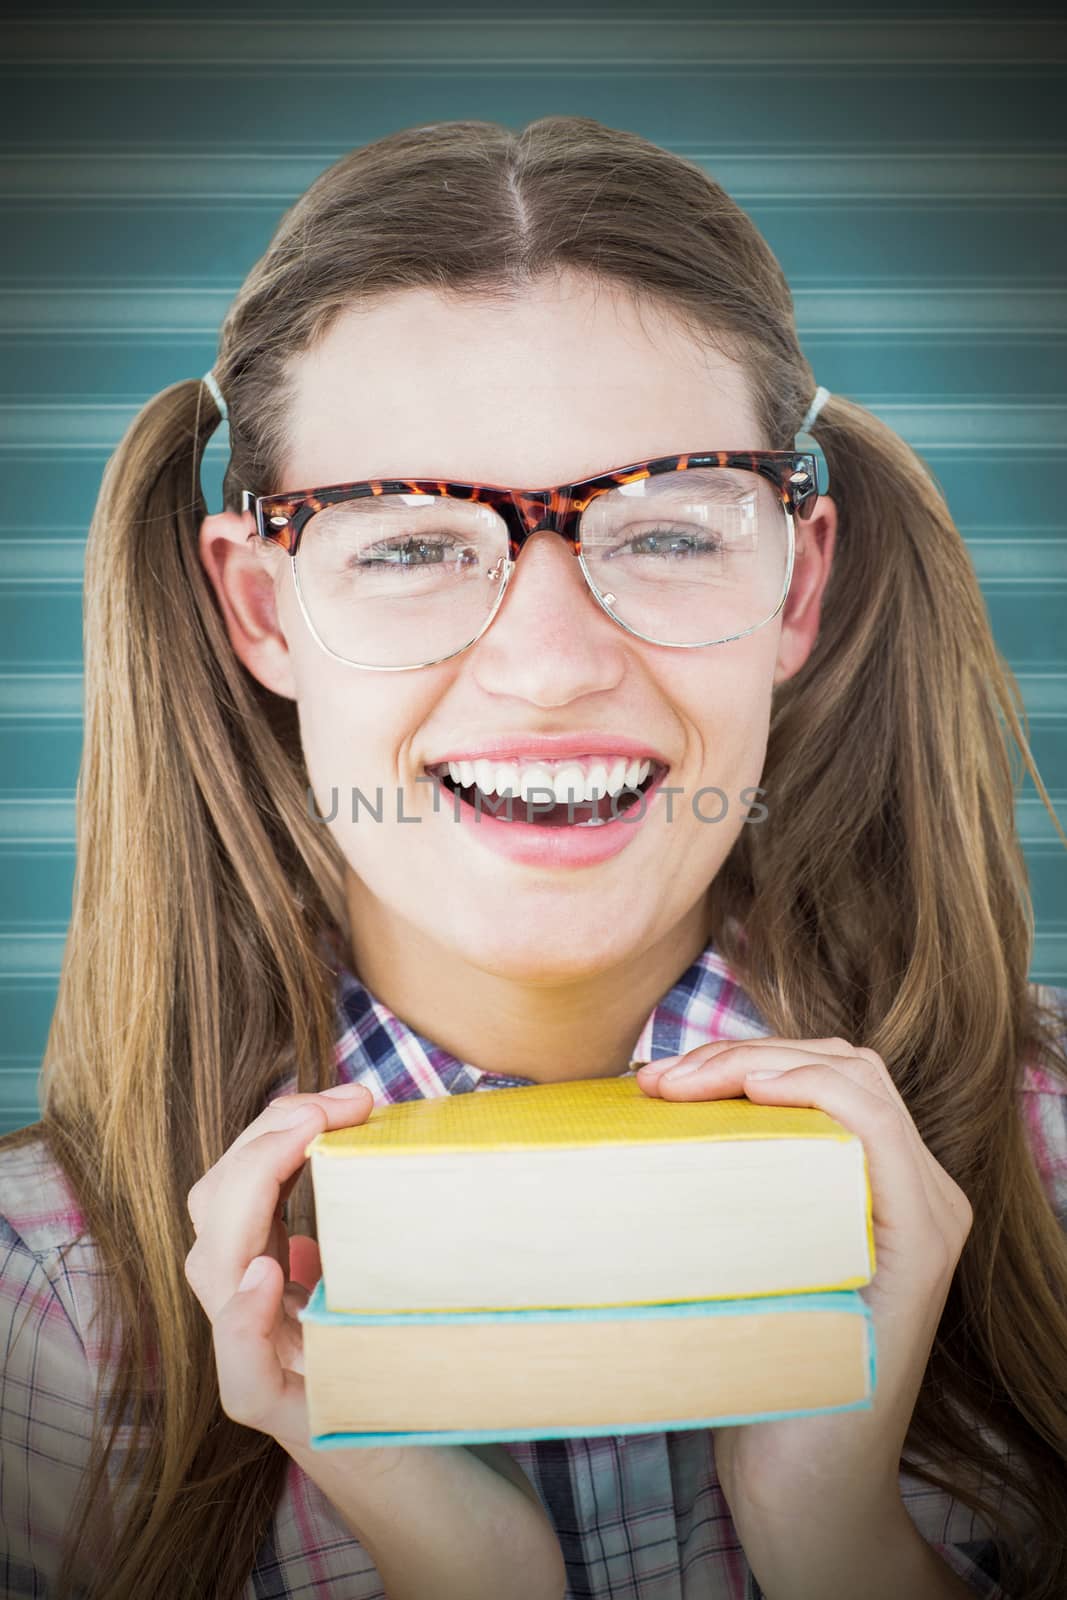 Geeky hipster smiling at camera against background